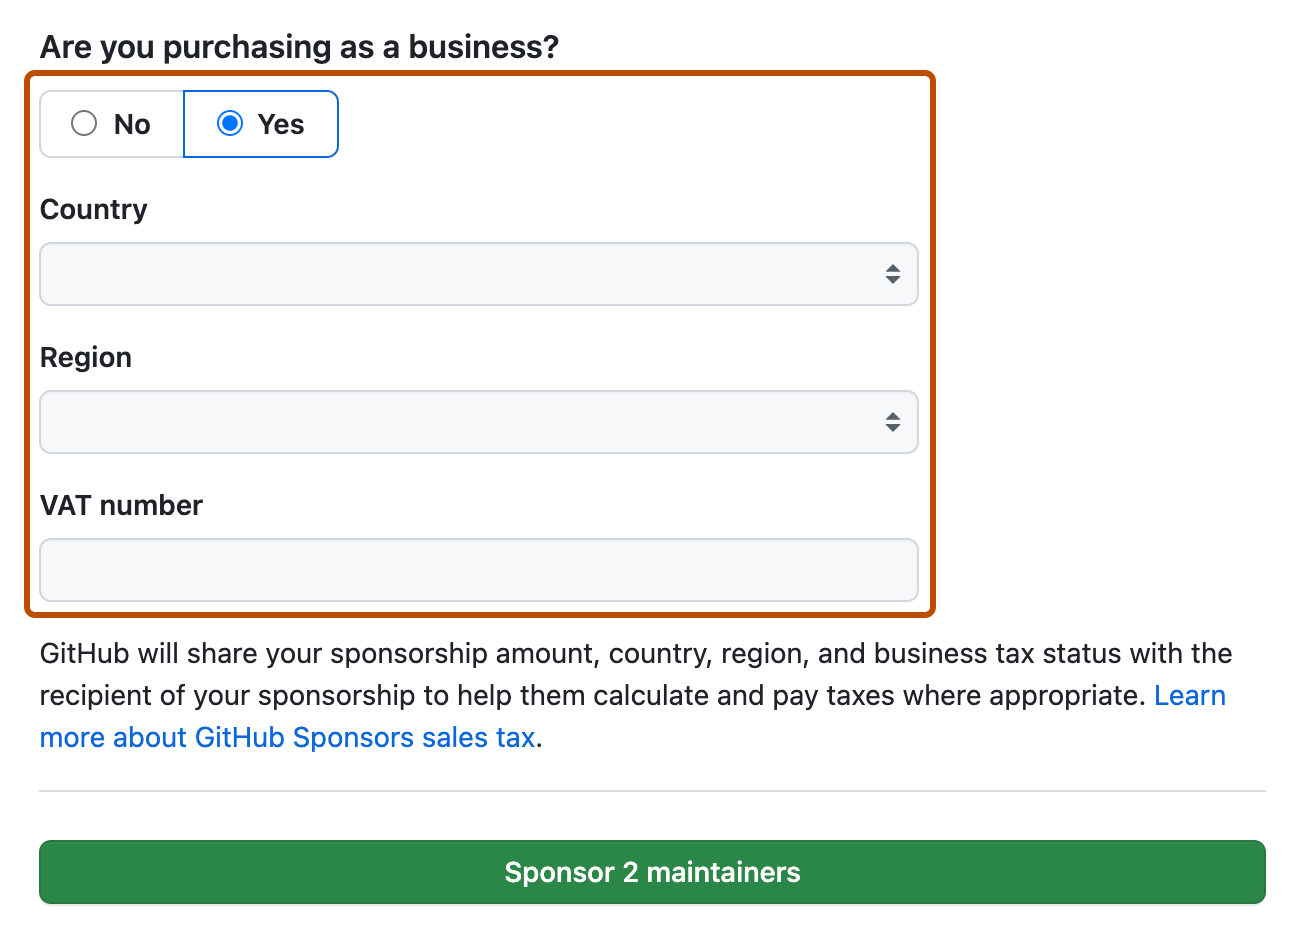 Screenshot of the sponsorship checkout page. The fields for sponsoring as a business are outlined in dark orange.